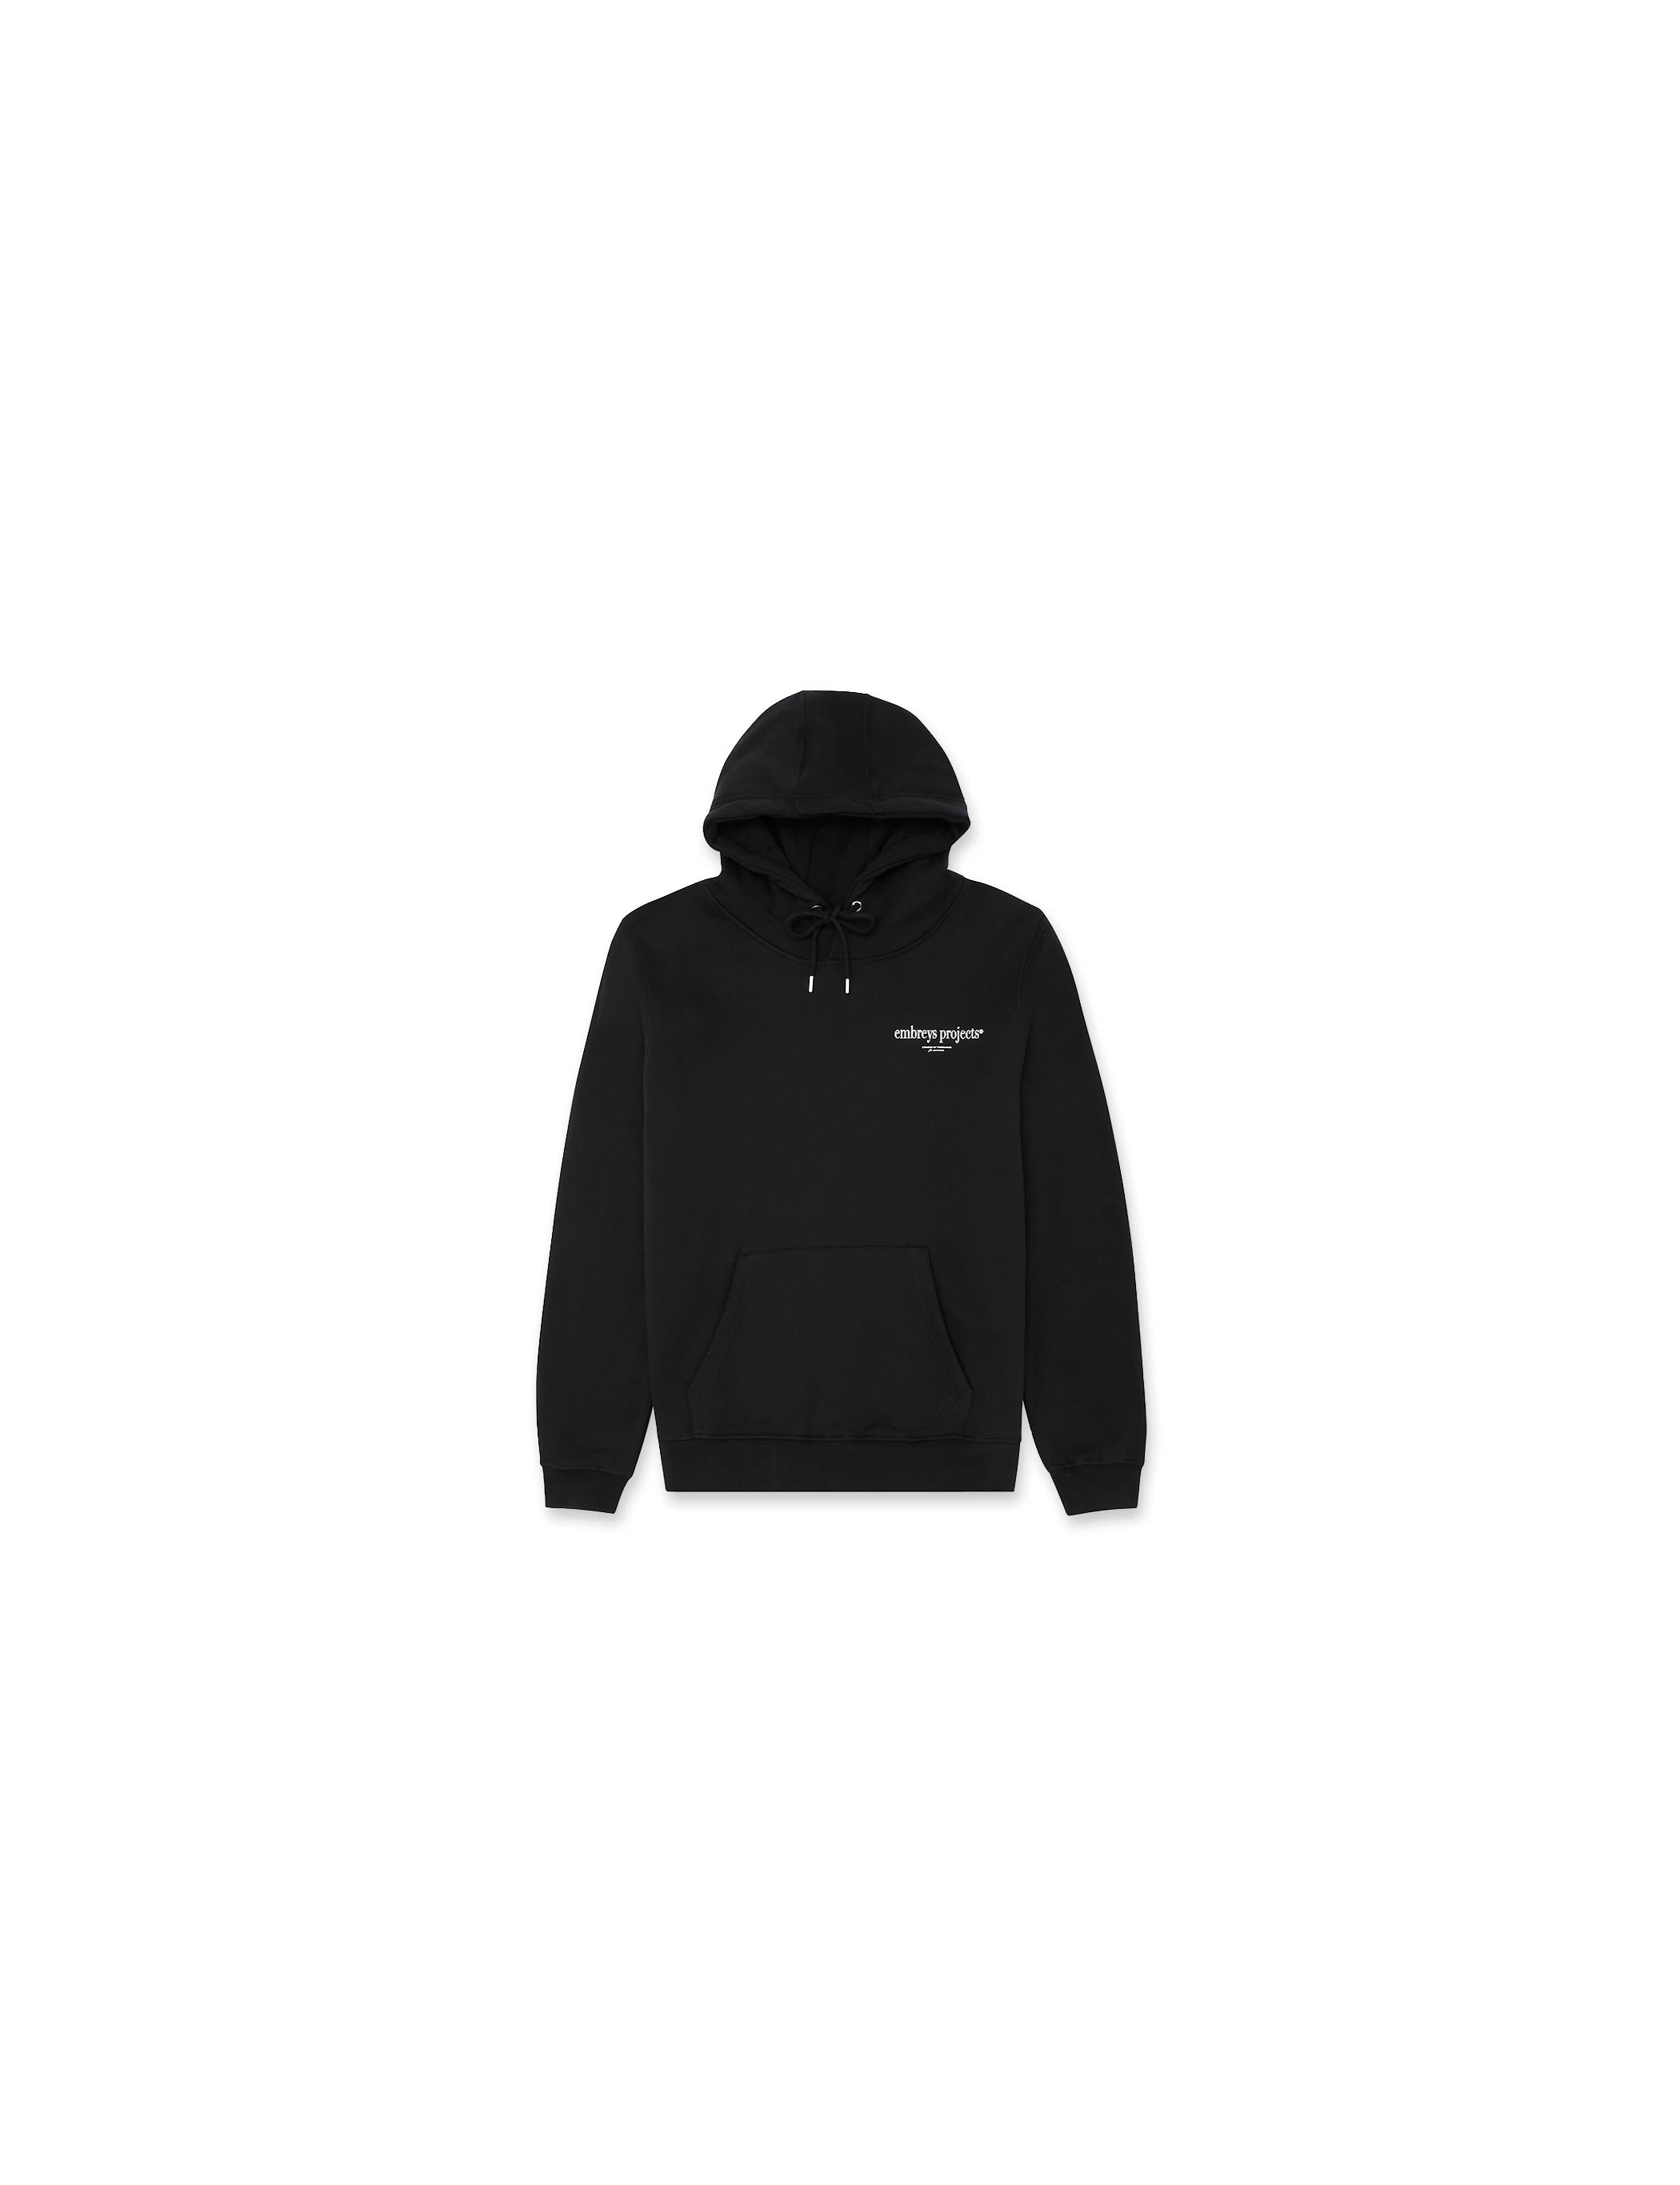 REFLECTION HOODIE - BLACK - Embreys Projects